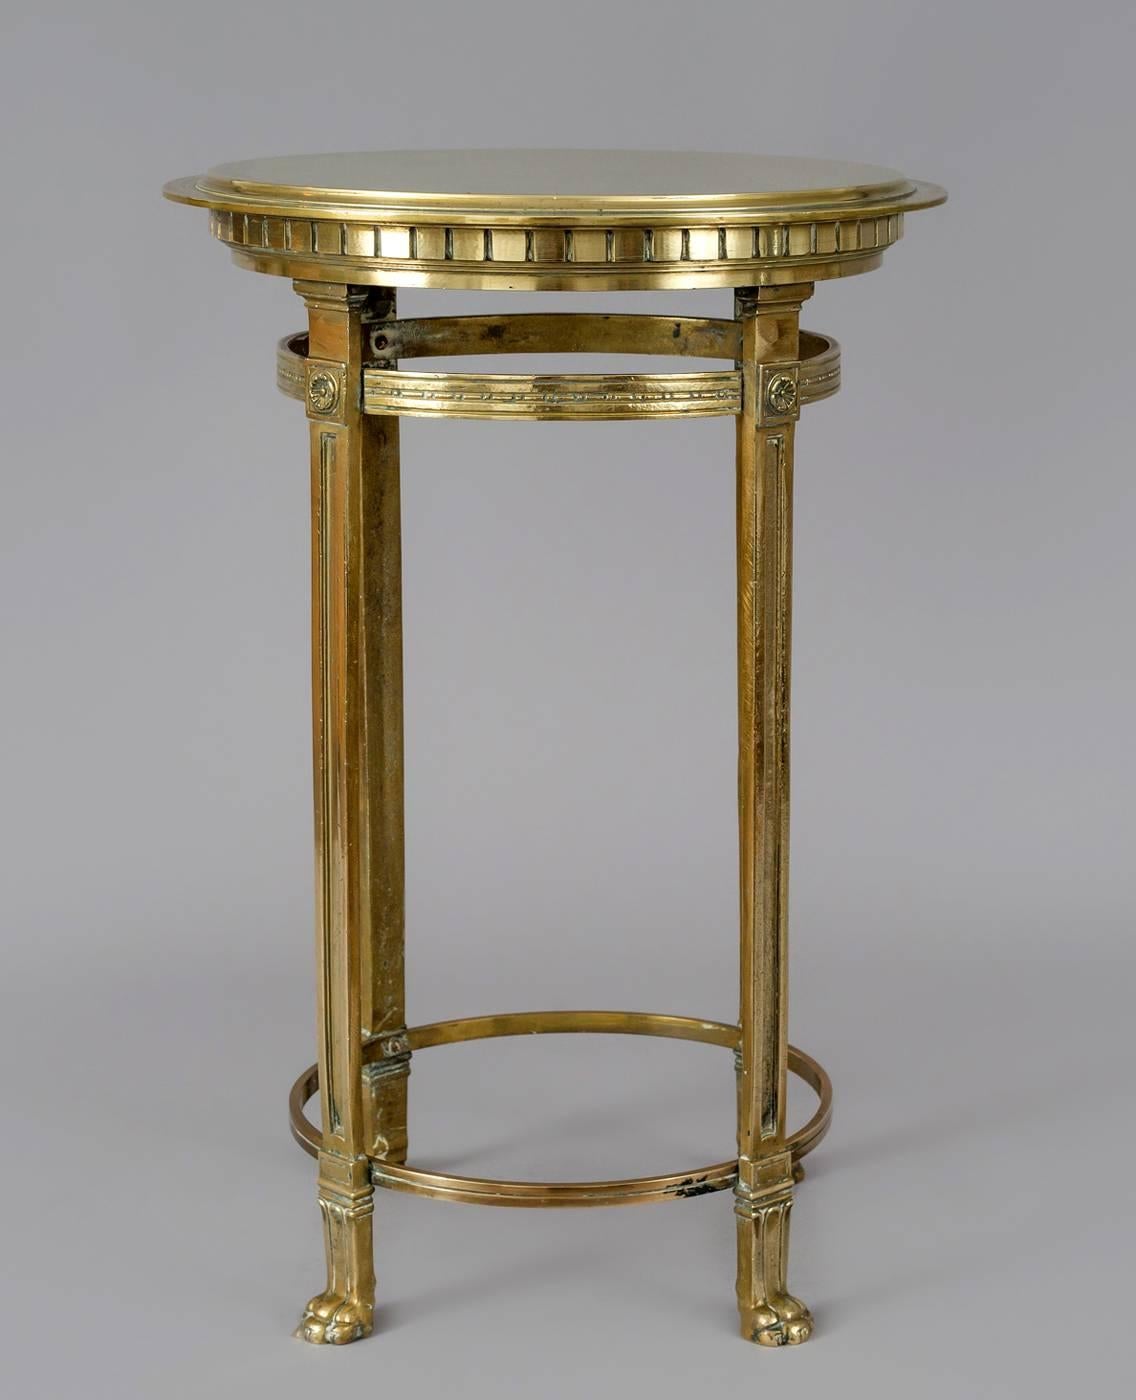 French low round bronze gueridon table with stepped circular top above a dental molded frieze, raised on four straight tapered legs ending in paw feet. The legs are joined by two round stretchers.